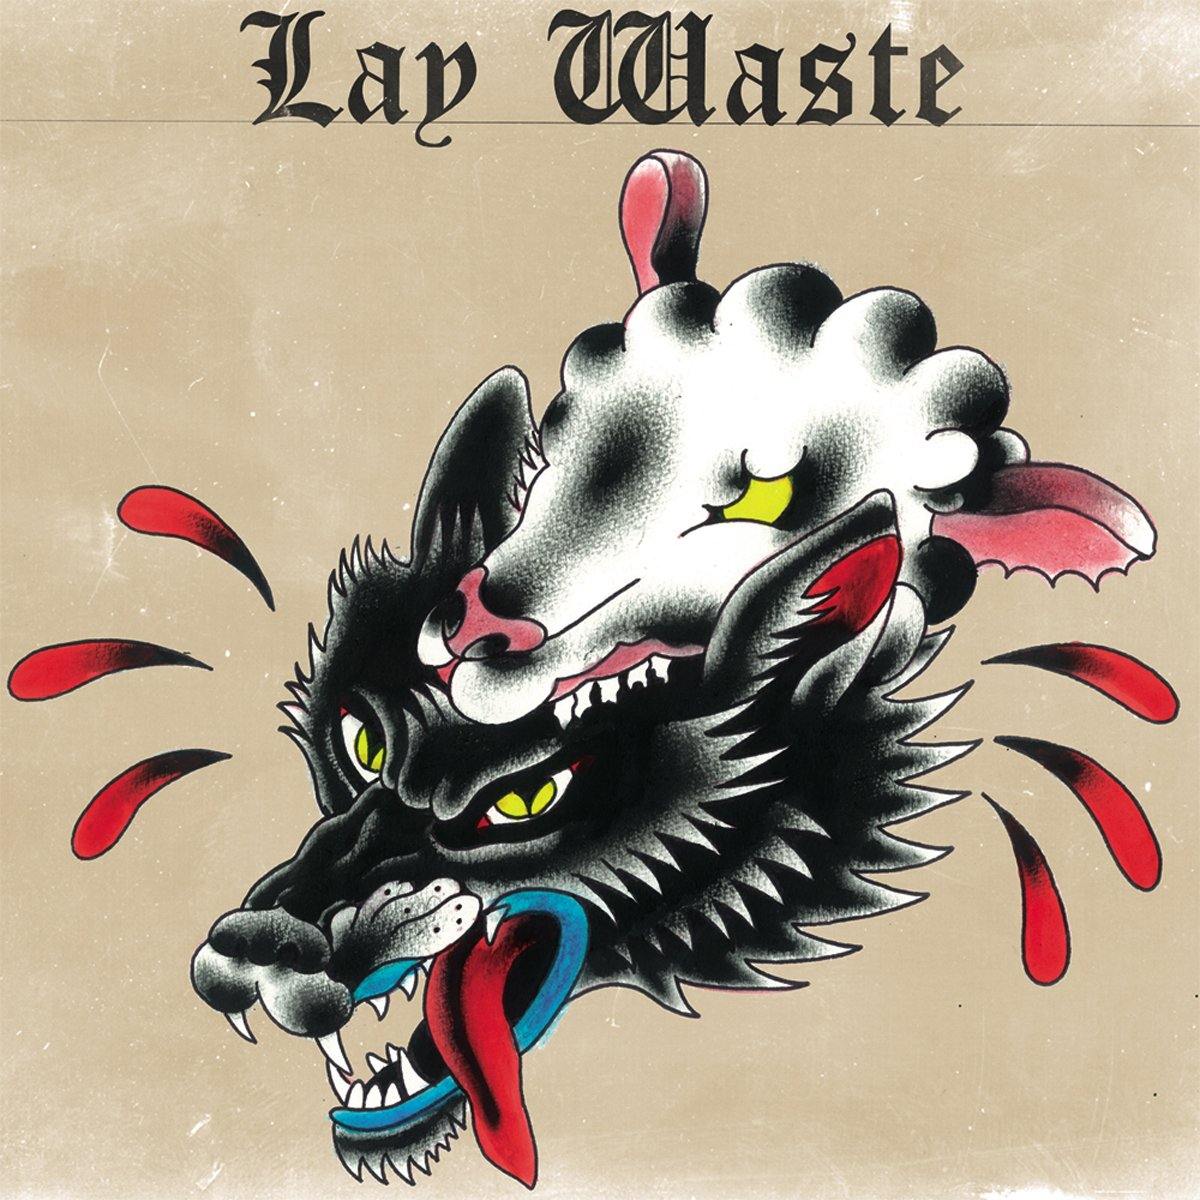 Buy – Lay Waste "Lay Waste" Digital Download – Band & Music Merch – Cold Cuts Merch